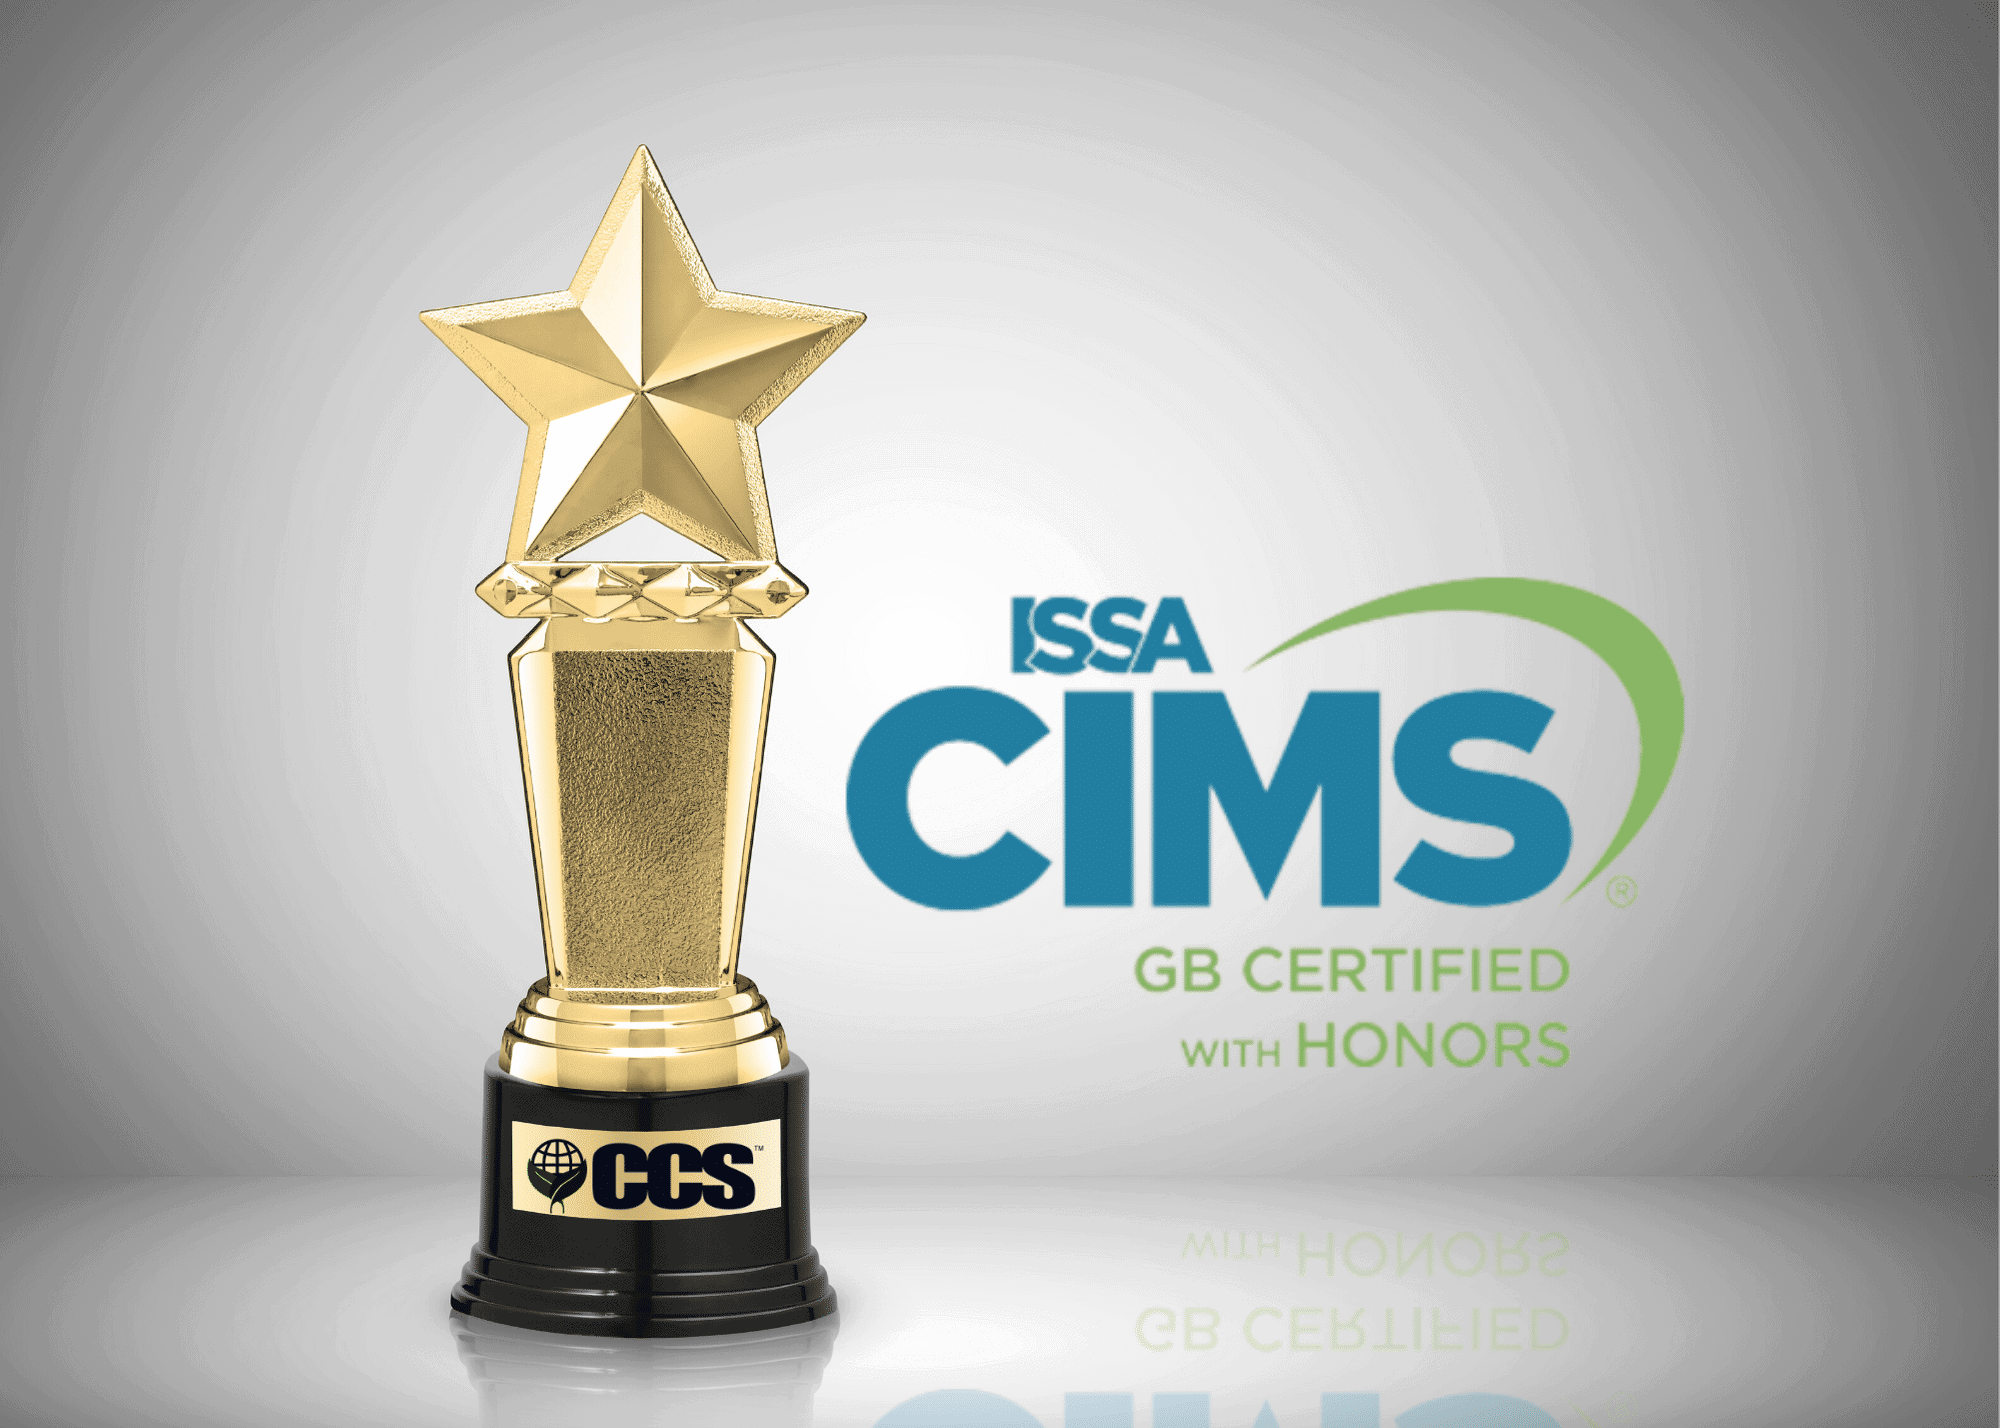 CCS Facility Services Receives CIMS Certification with Honors